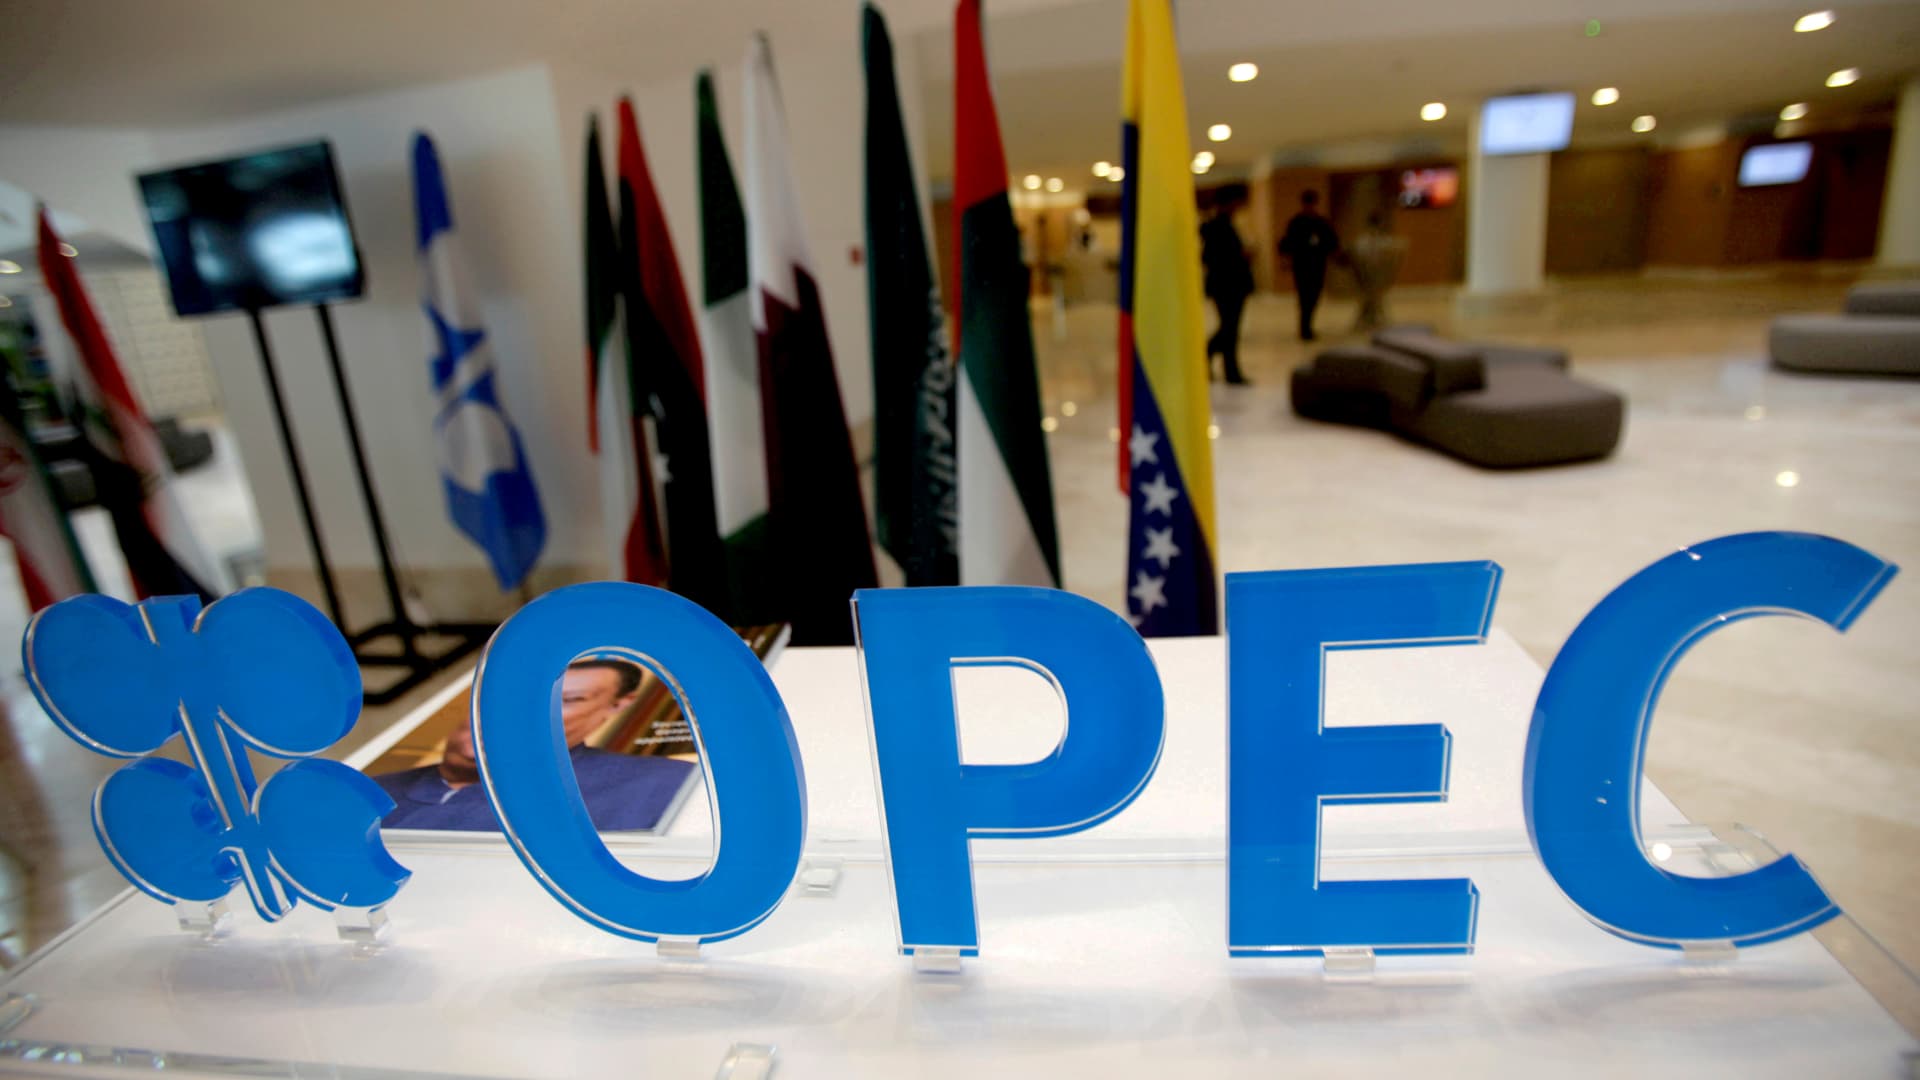 No current plan for the UAE to leave OPEC oil alliance, sources say